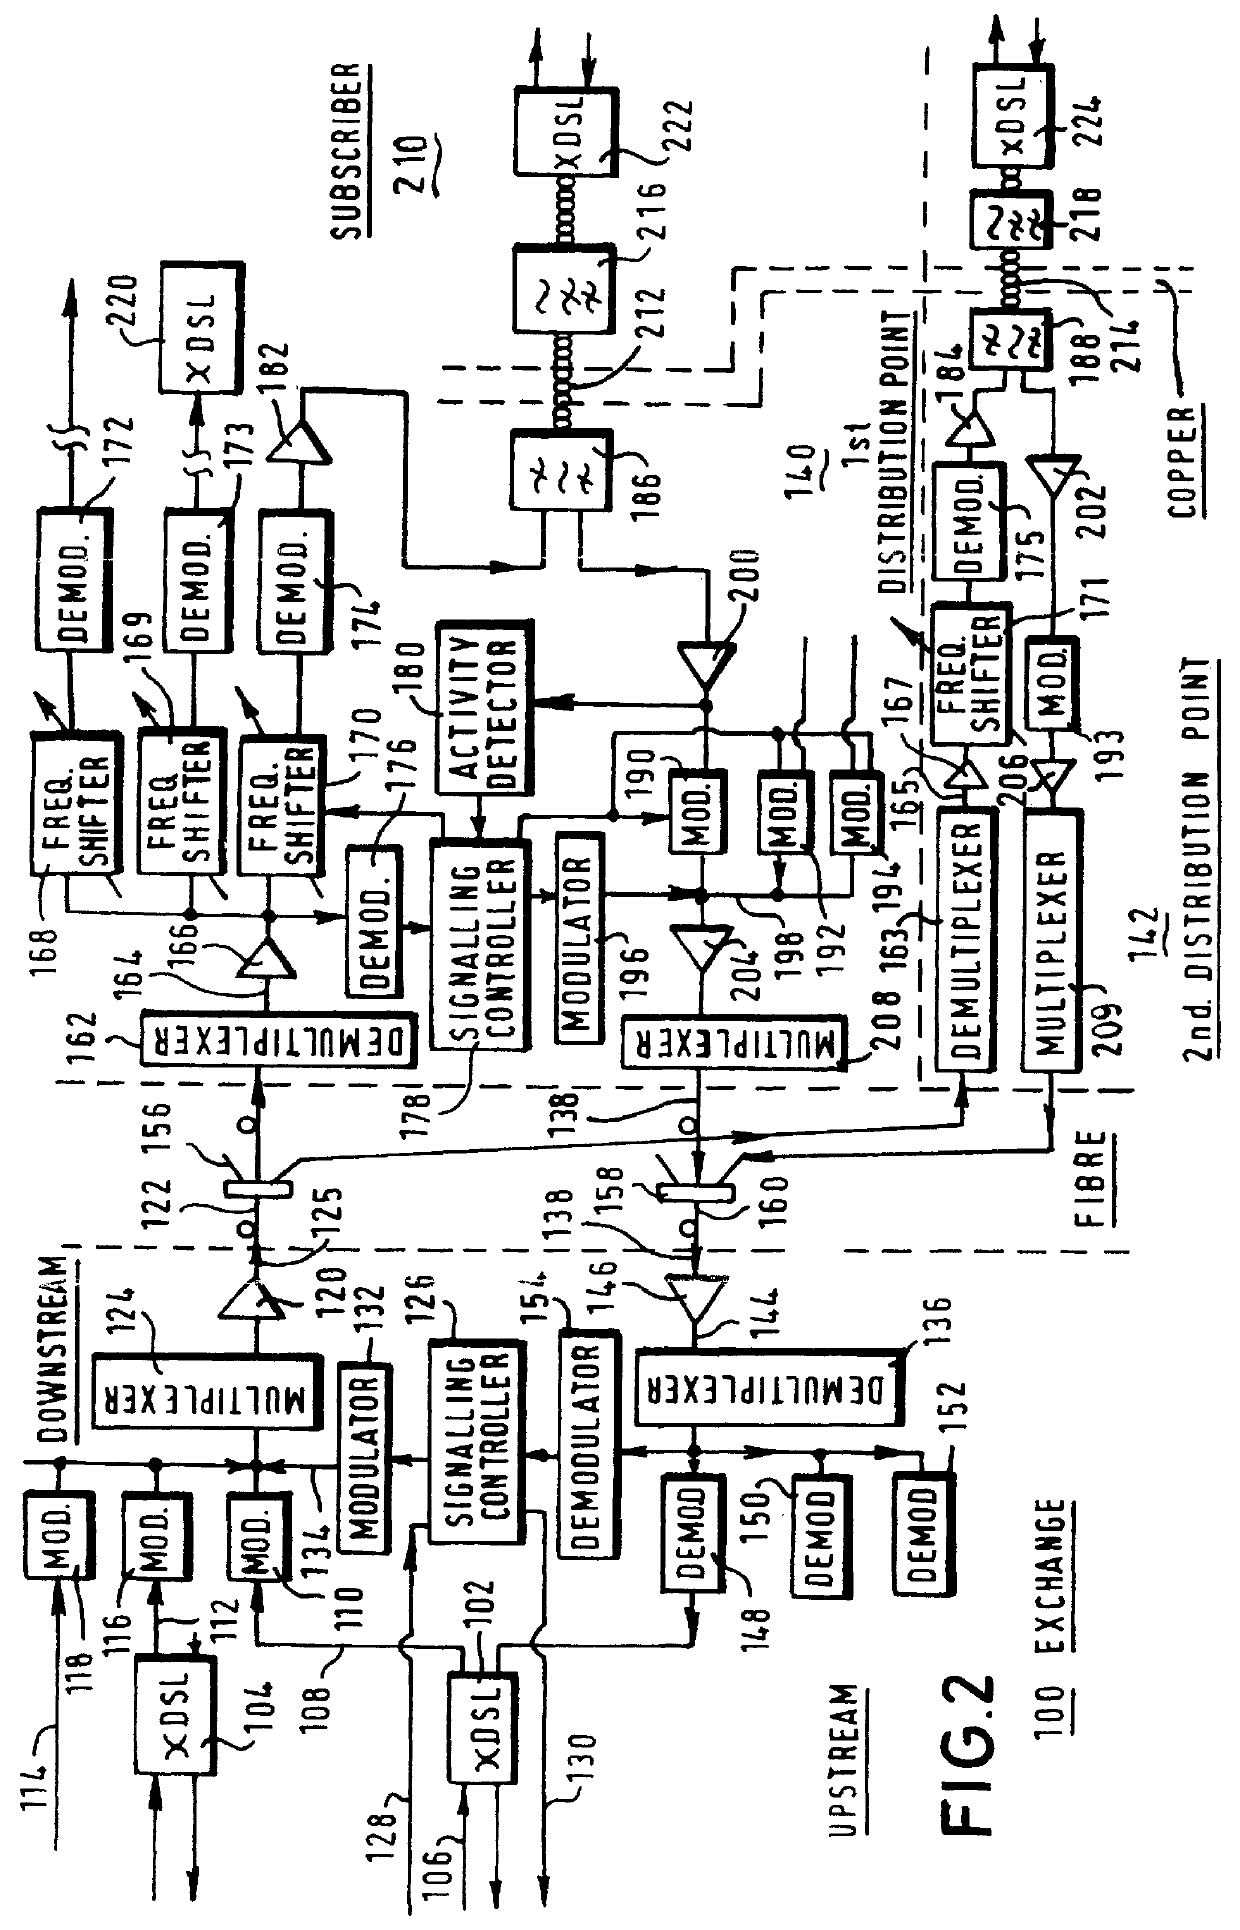 Communication system architecture, exchange having a plurality of broadband modems and method of supporting broadband operation on a one to one basis